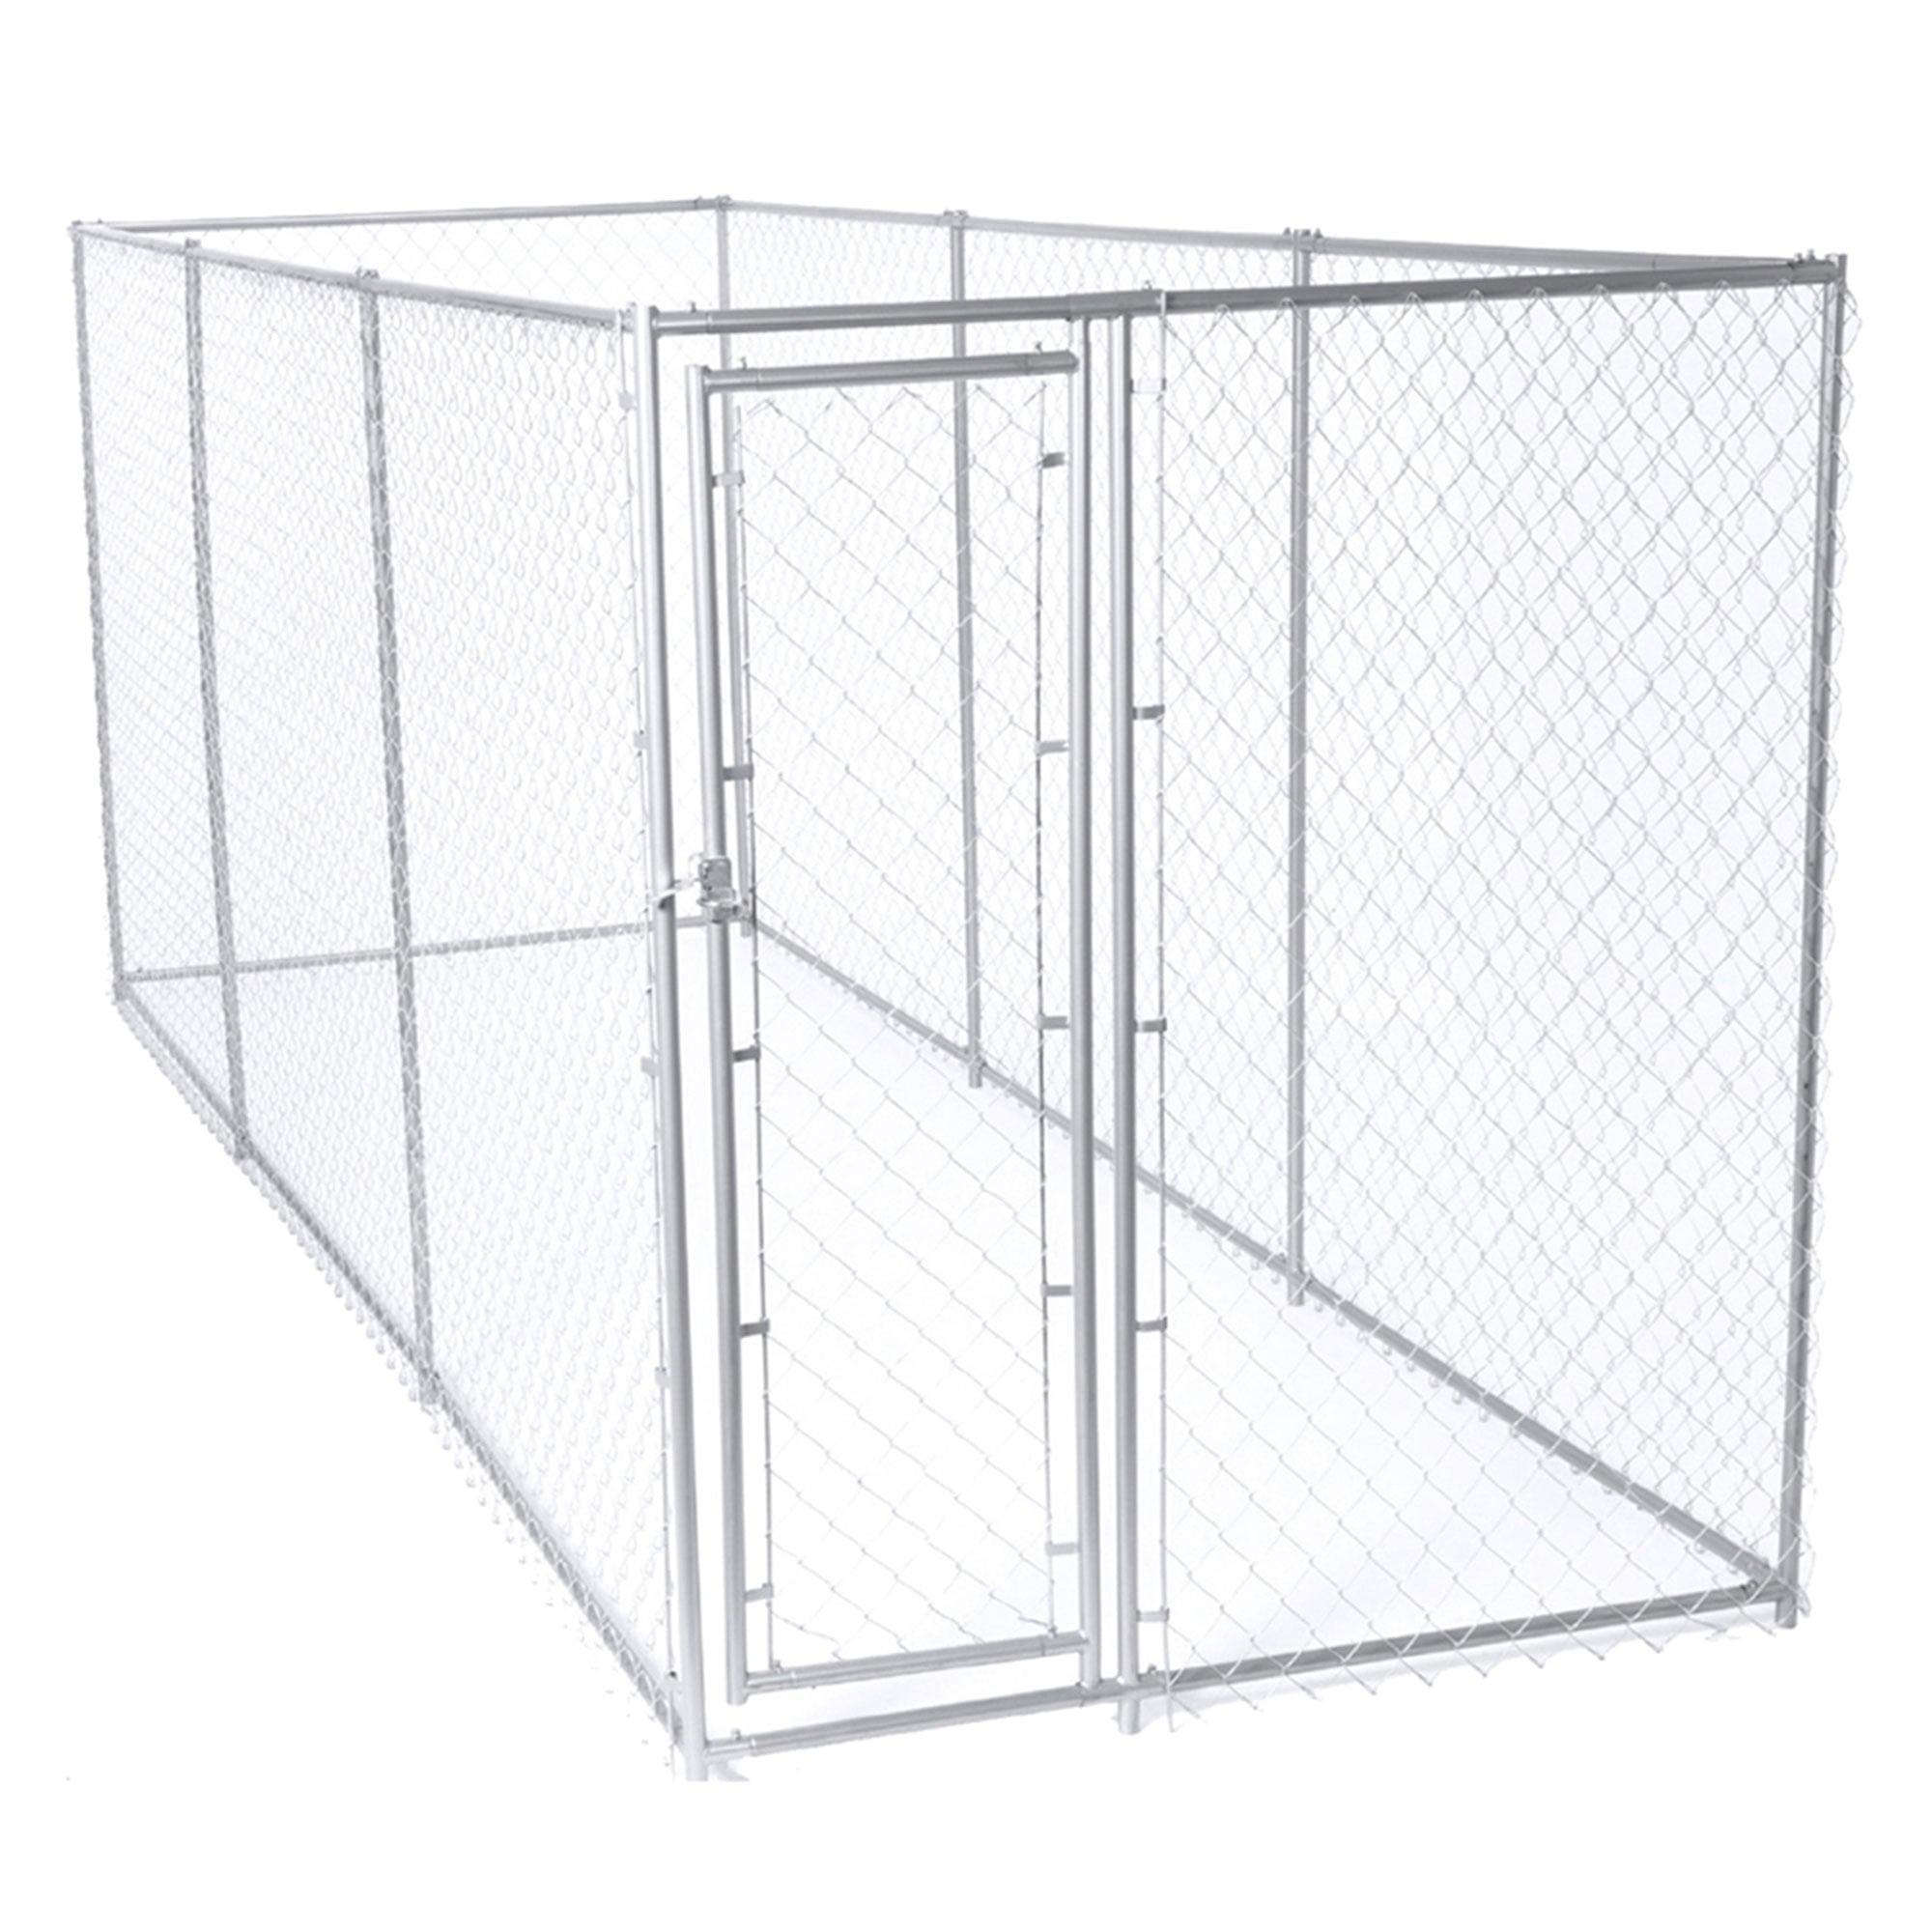 Lucky Dog 2-in-1 Size Galvanized Chain Link Kennel - Silver - CL 61528EZ